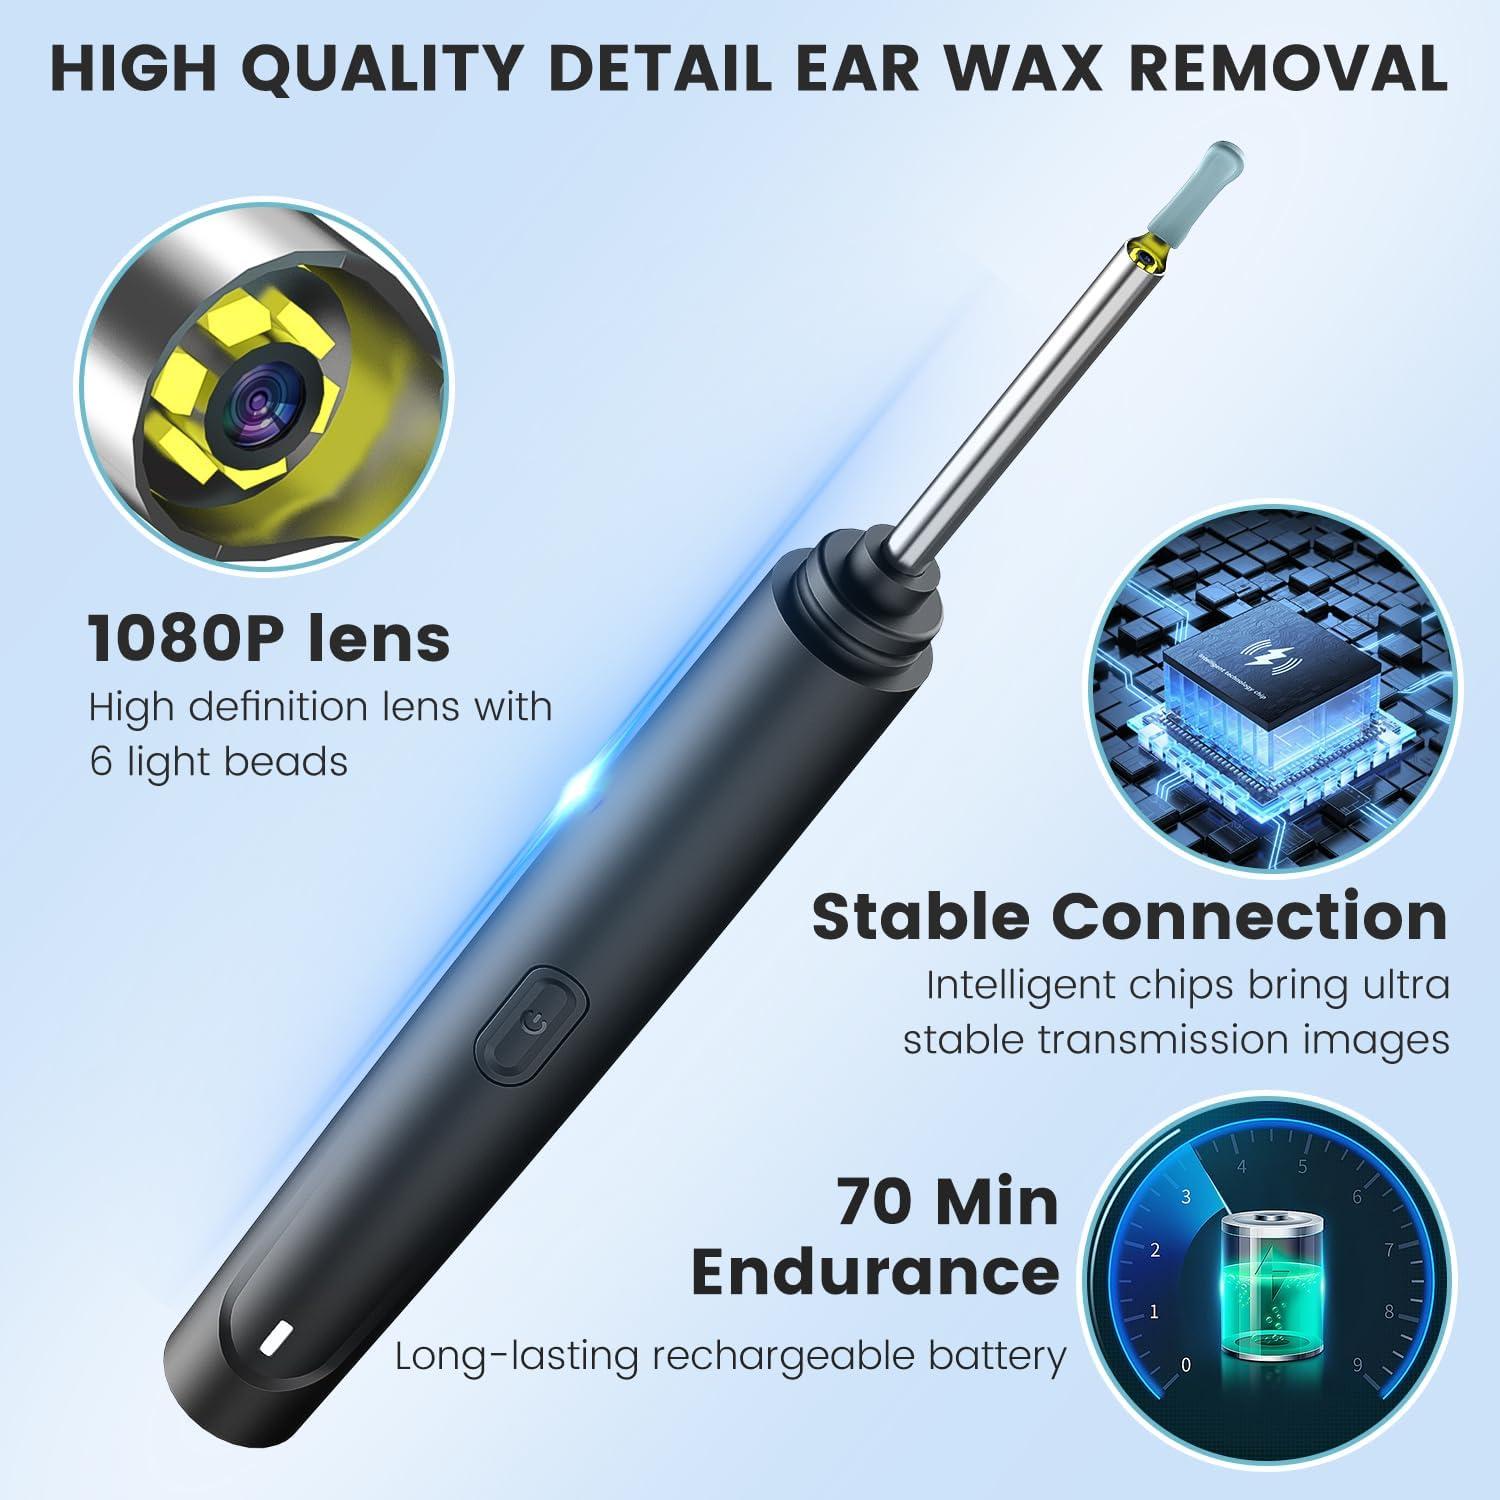 BEBIRD Ear Wax Removal Tool - R1 Upgraded Ear Cleaner with 1080P Camera,  Smart Visual Earwax Cleaning Kit with 7 Pcs Ear Set for Daily Ear Pick, 6  LED